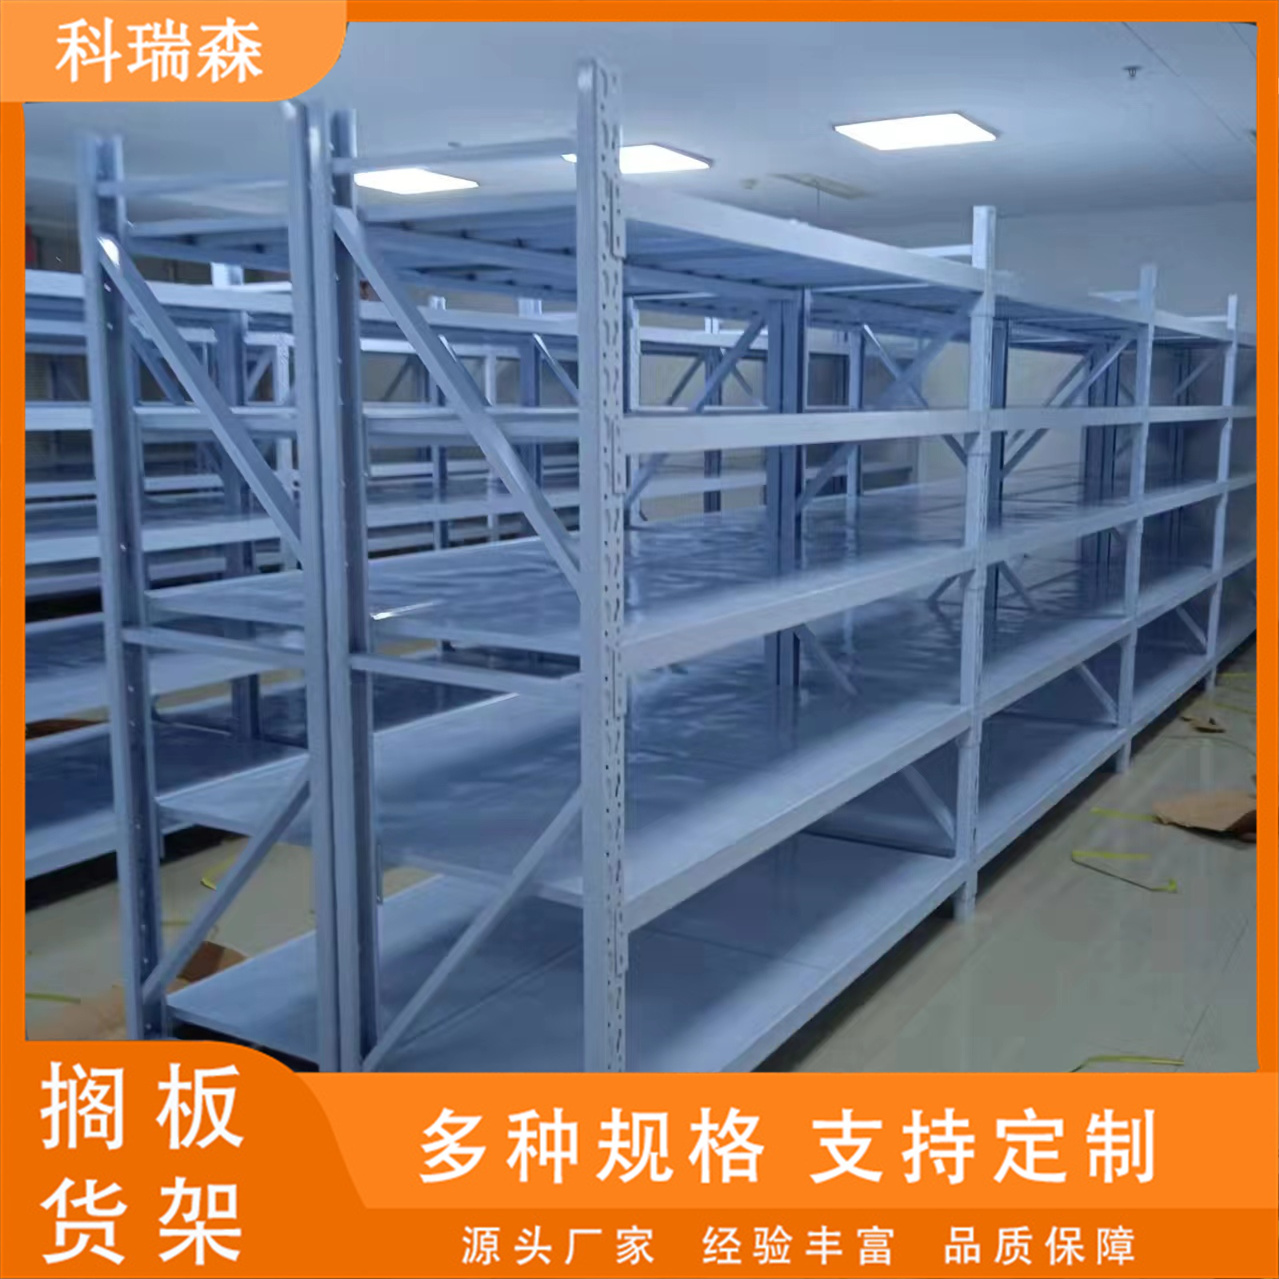 Medium shelf shelves with various specifications and high-quality steel to customize Coryson